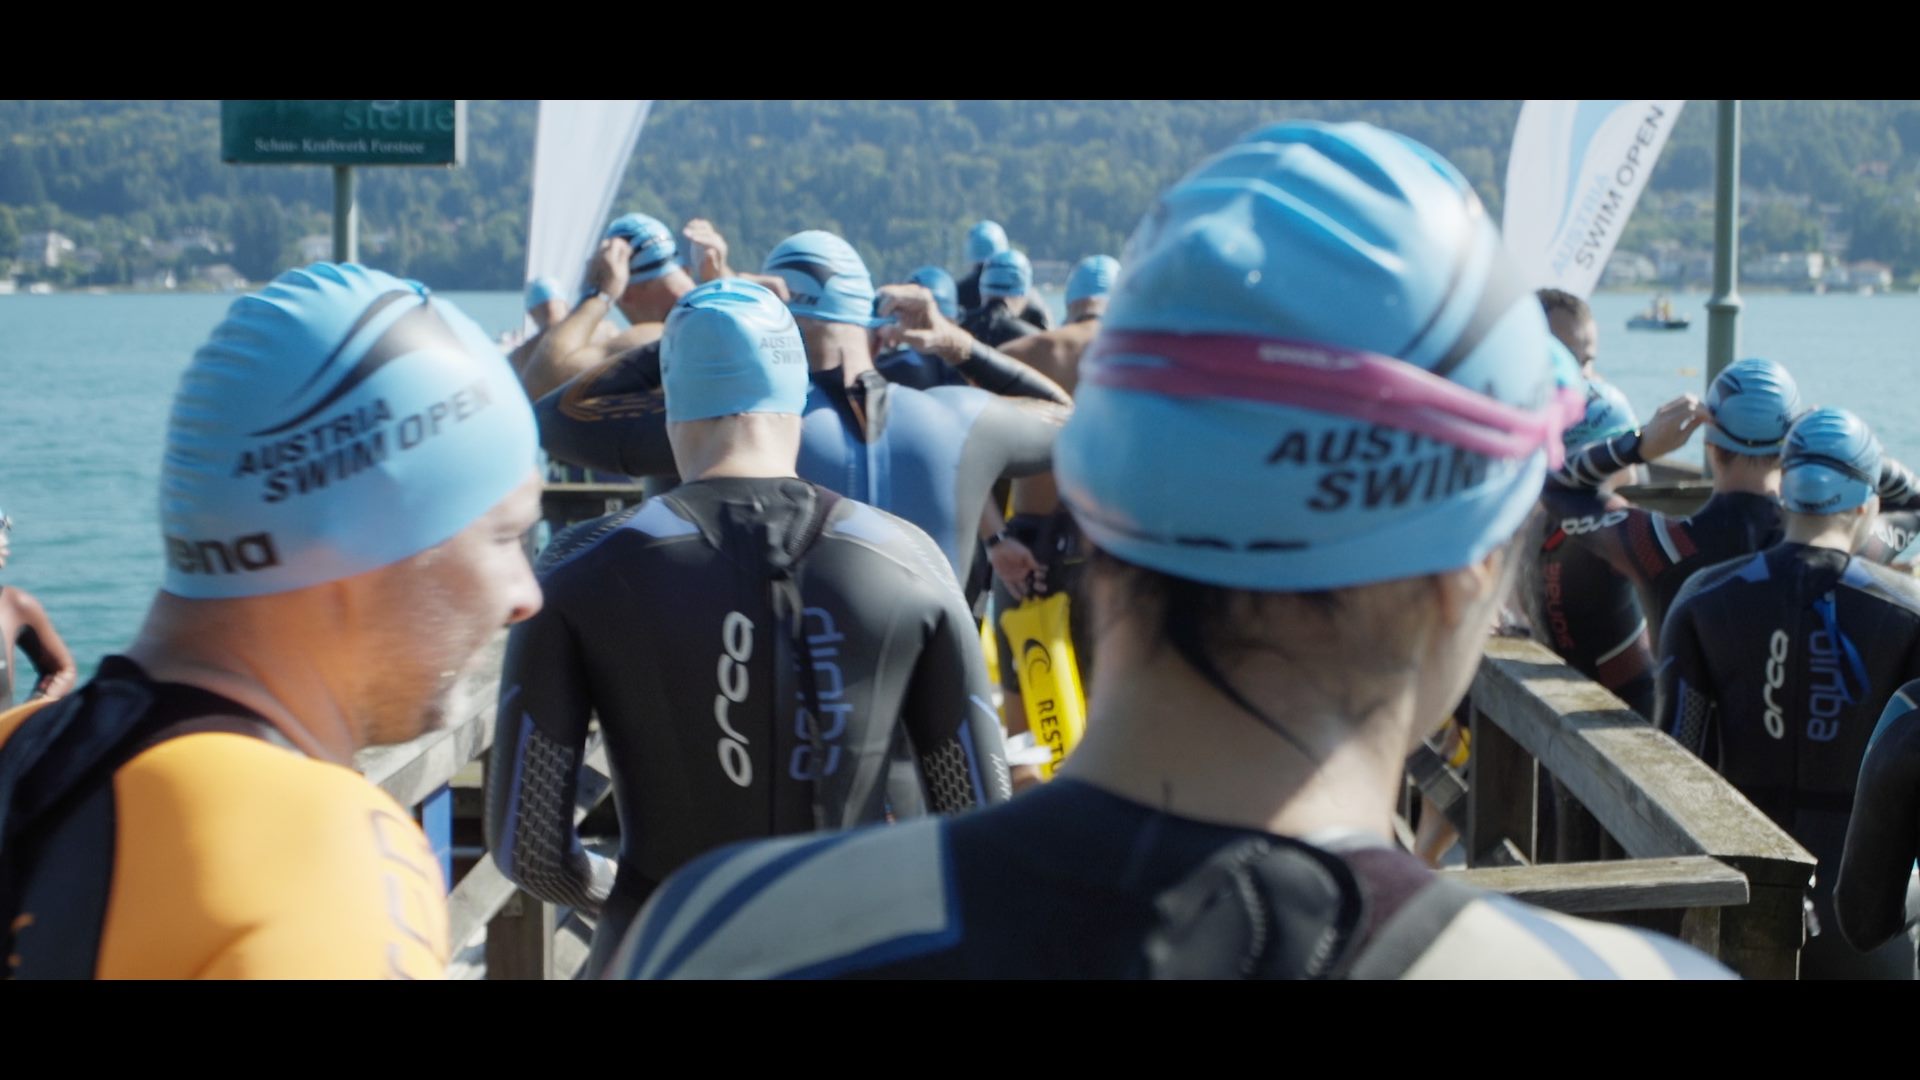 A group of people in wetsuits standing on a dock at the Austria Swim Open.